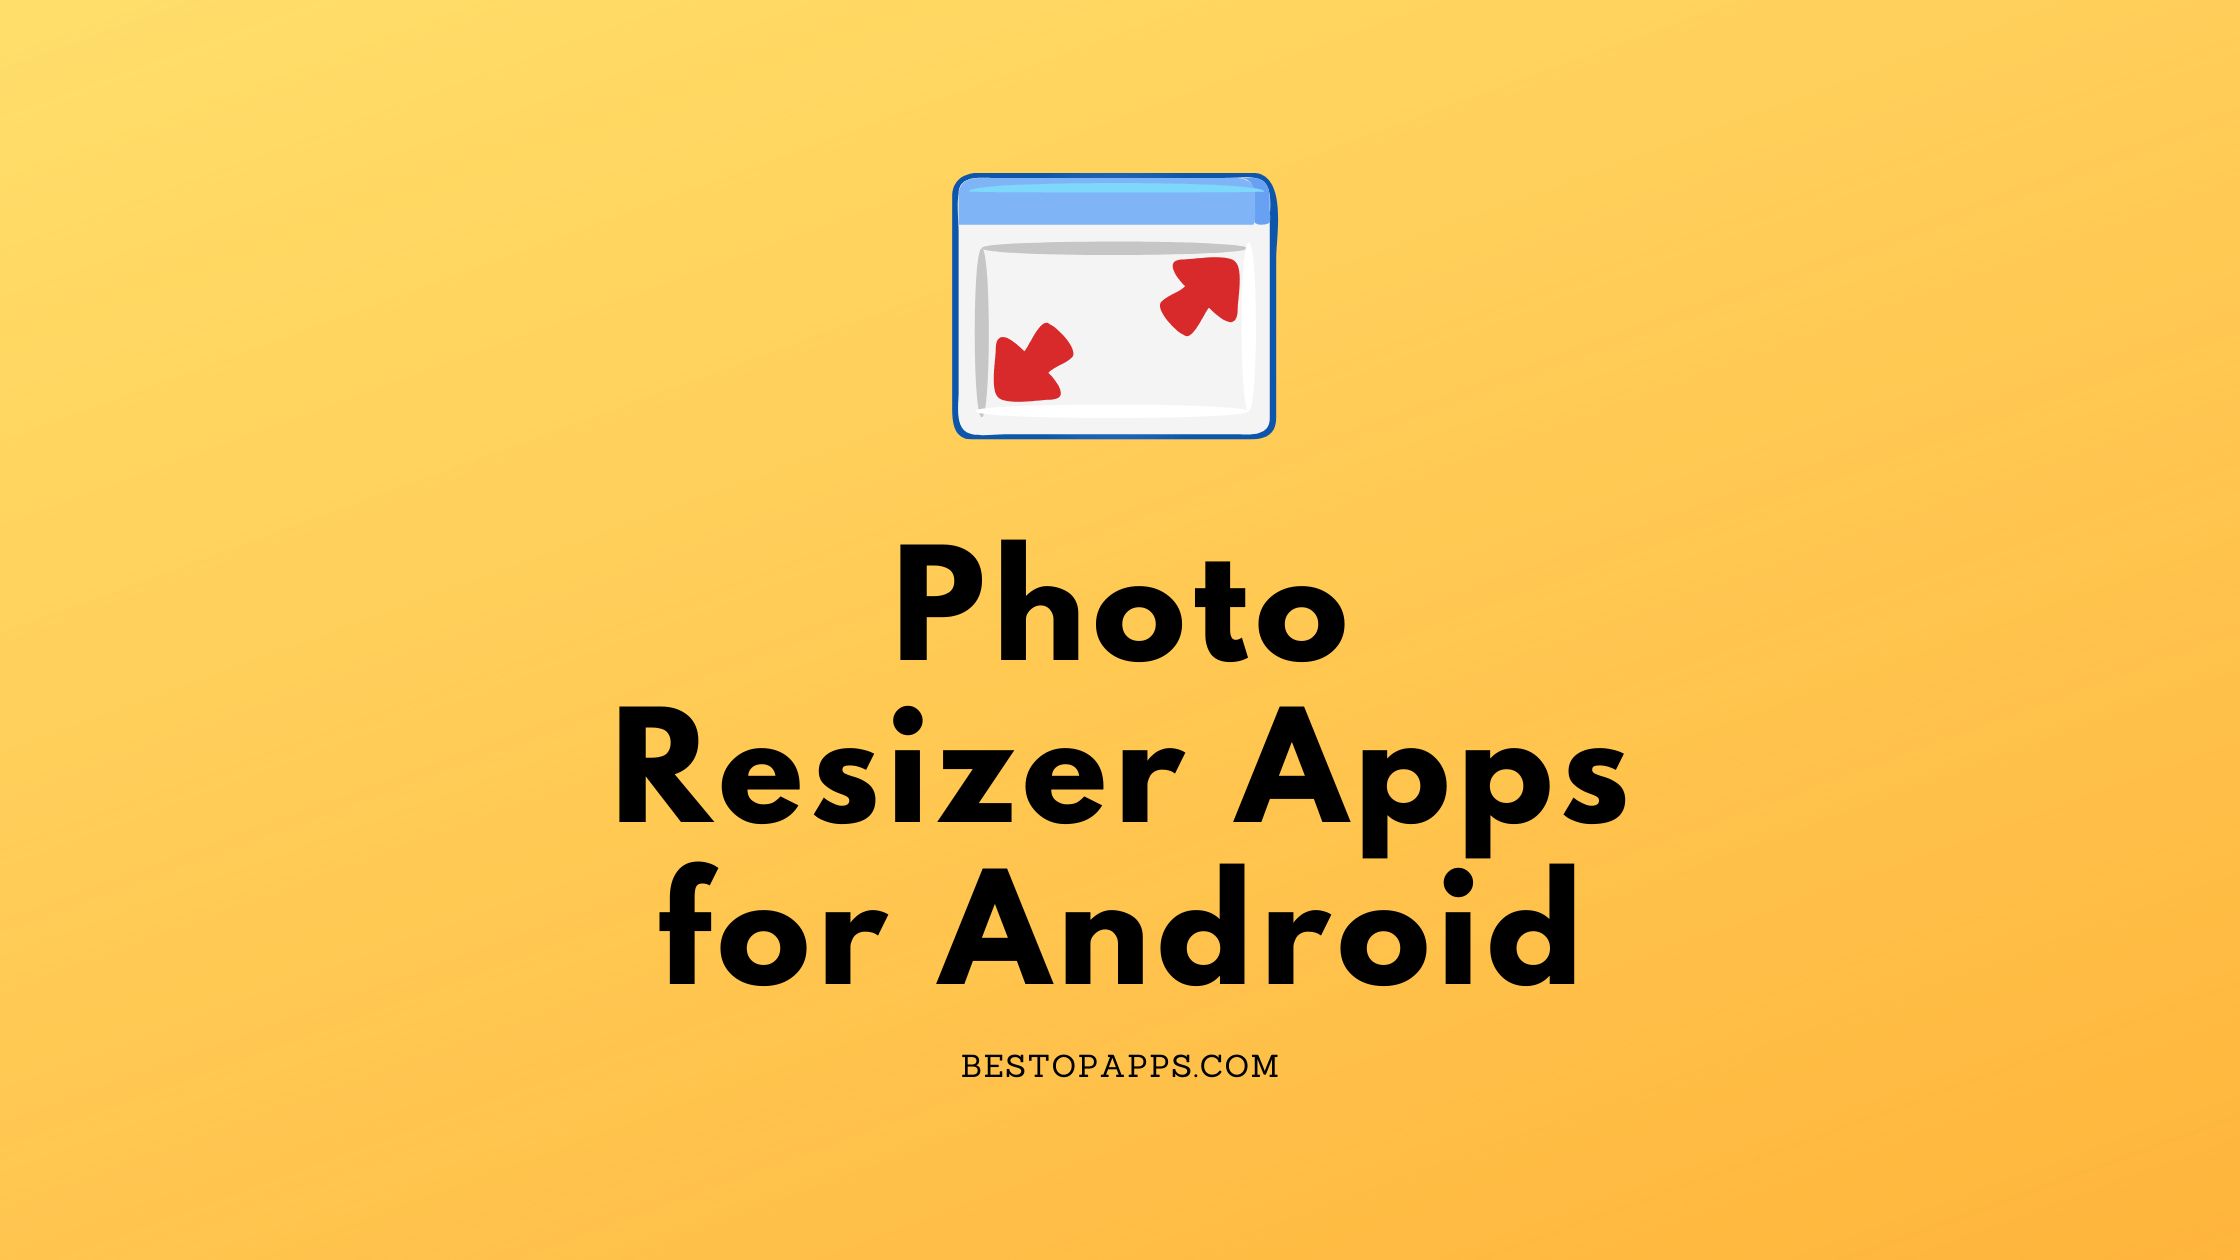 Photo Resizer Apps for Android